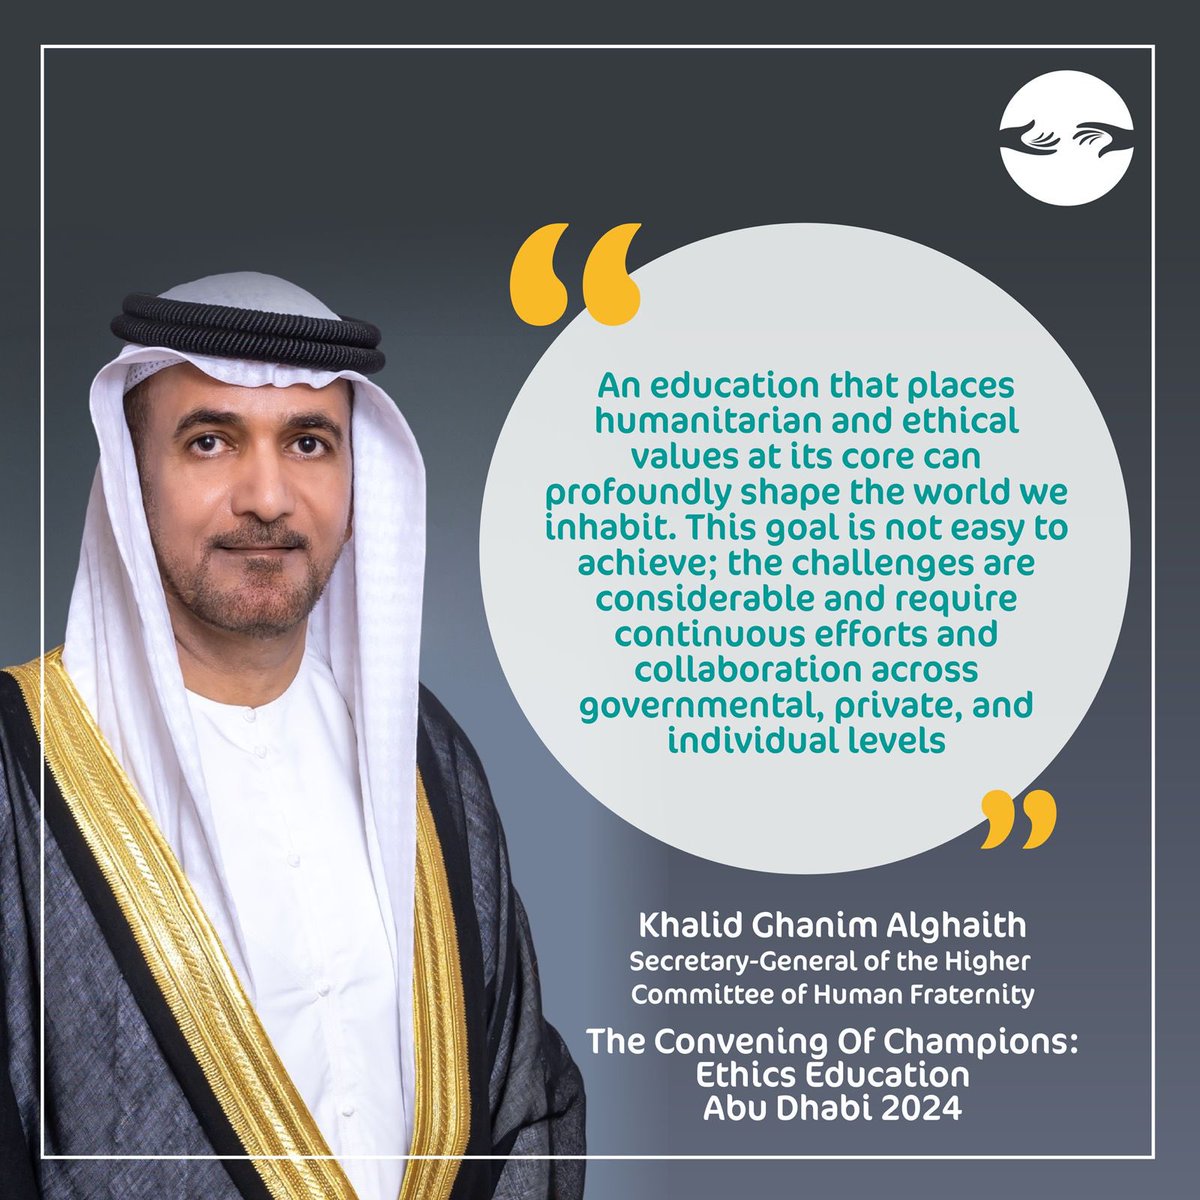 Part of a speech by His Excellency Ambassador Dr. Khaled Ghanem Al-Ghaith, Secretary-General of the Higher Committee of Human Fraternity, at the opening of The CONVENING OF CHAMPIONS,' as part of the Ethics Education Fellowship Program.